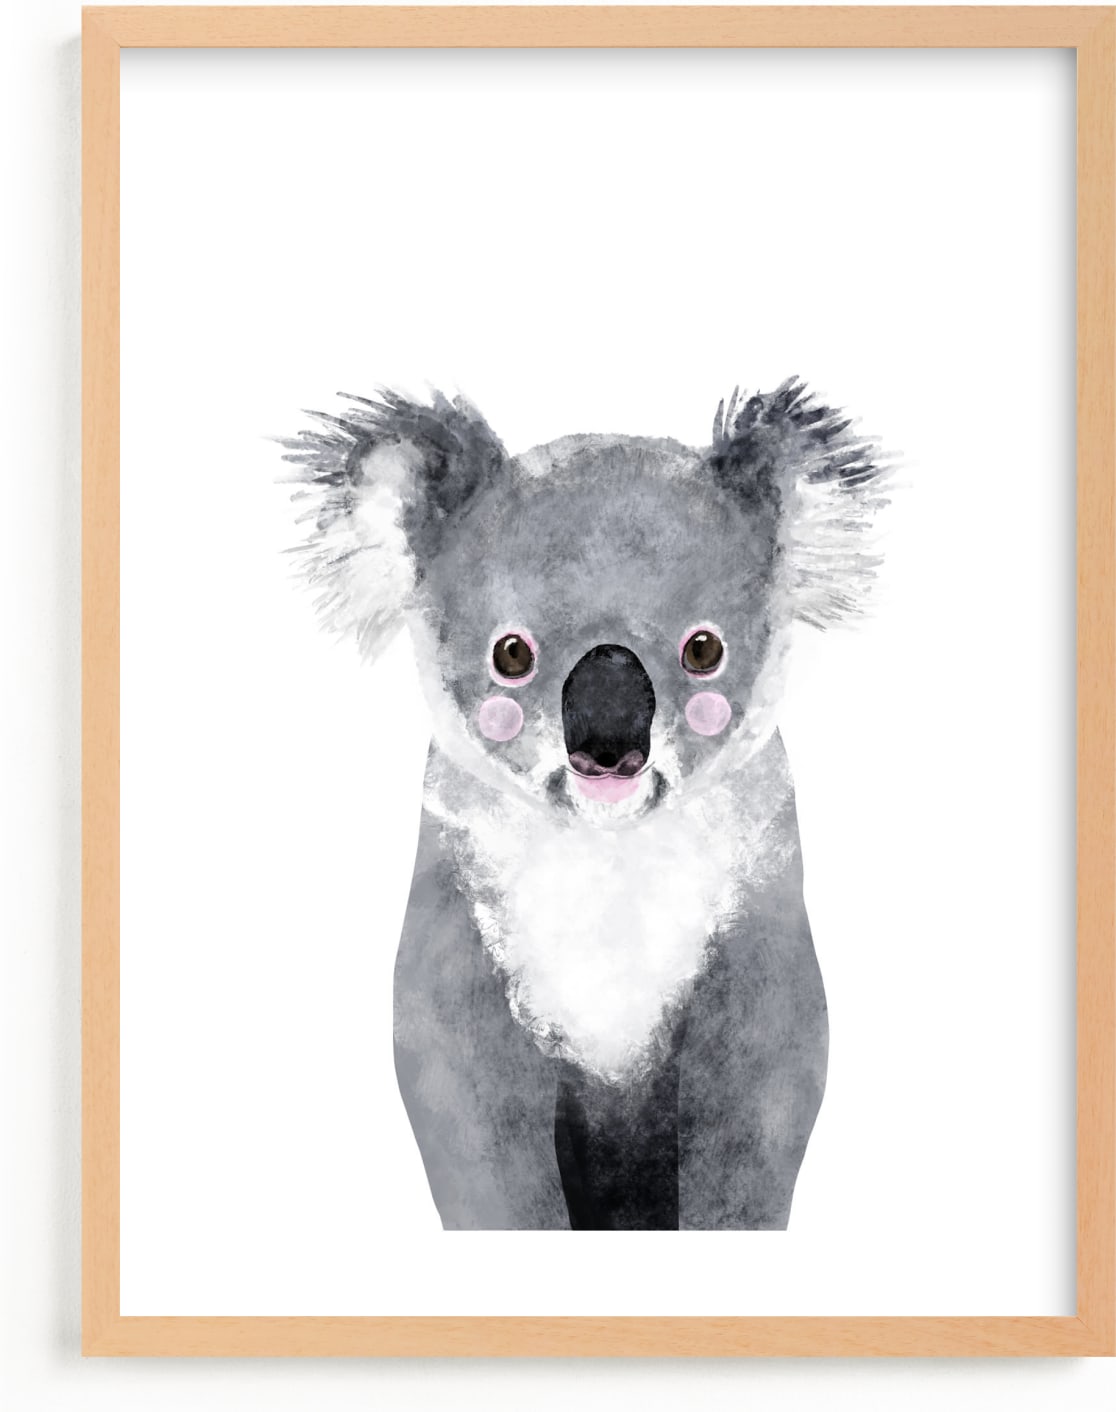 This is a white art by Cass Loh called Baby Koala.